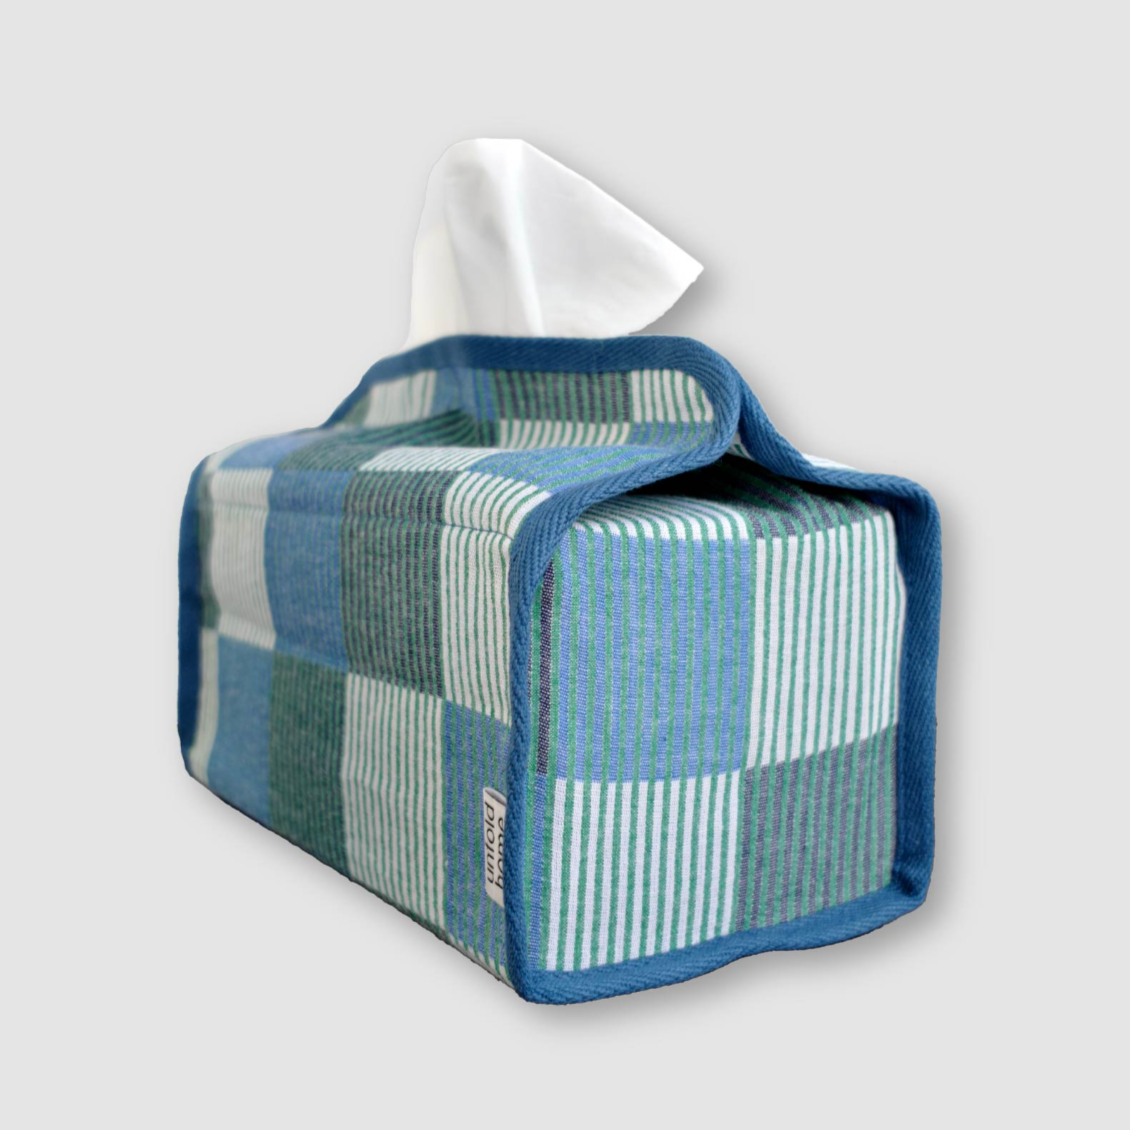 [unfold] Patchwork Tissue Cover (blue)